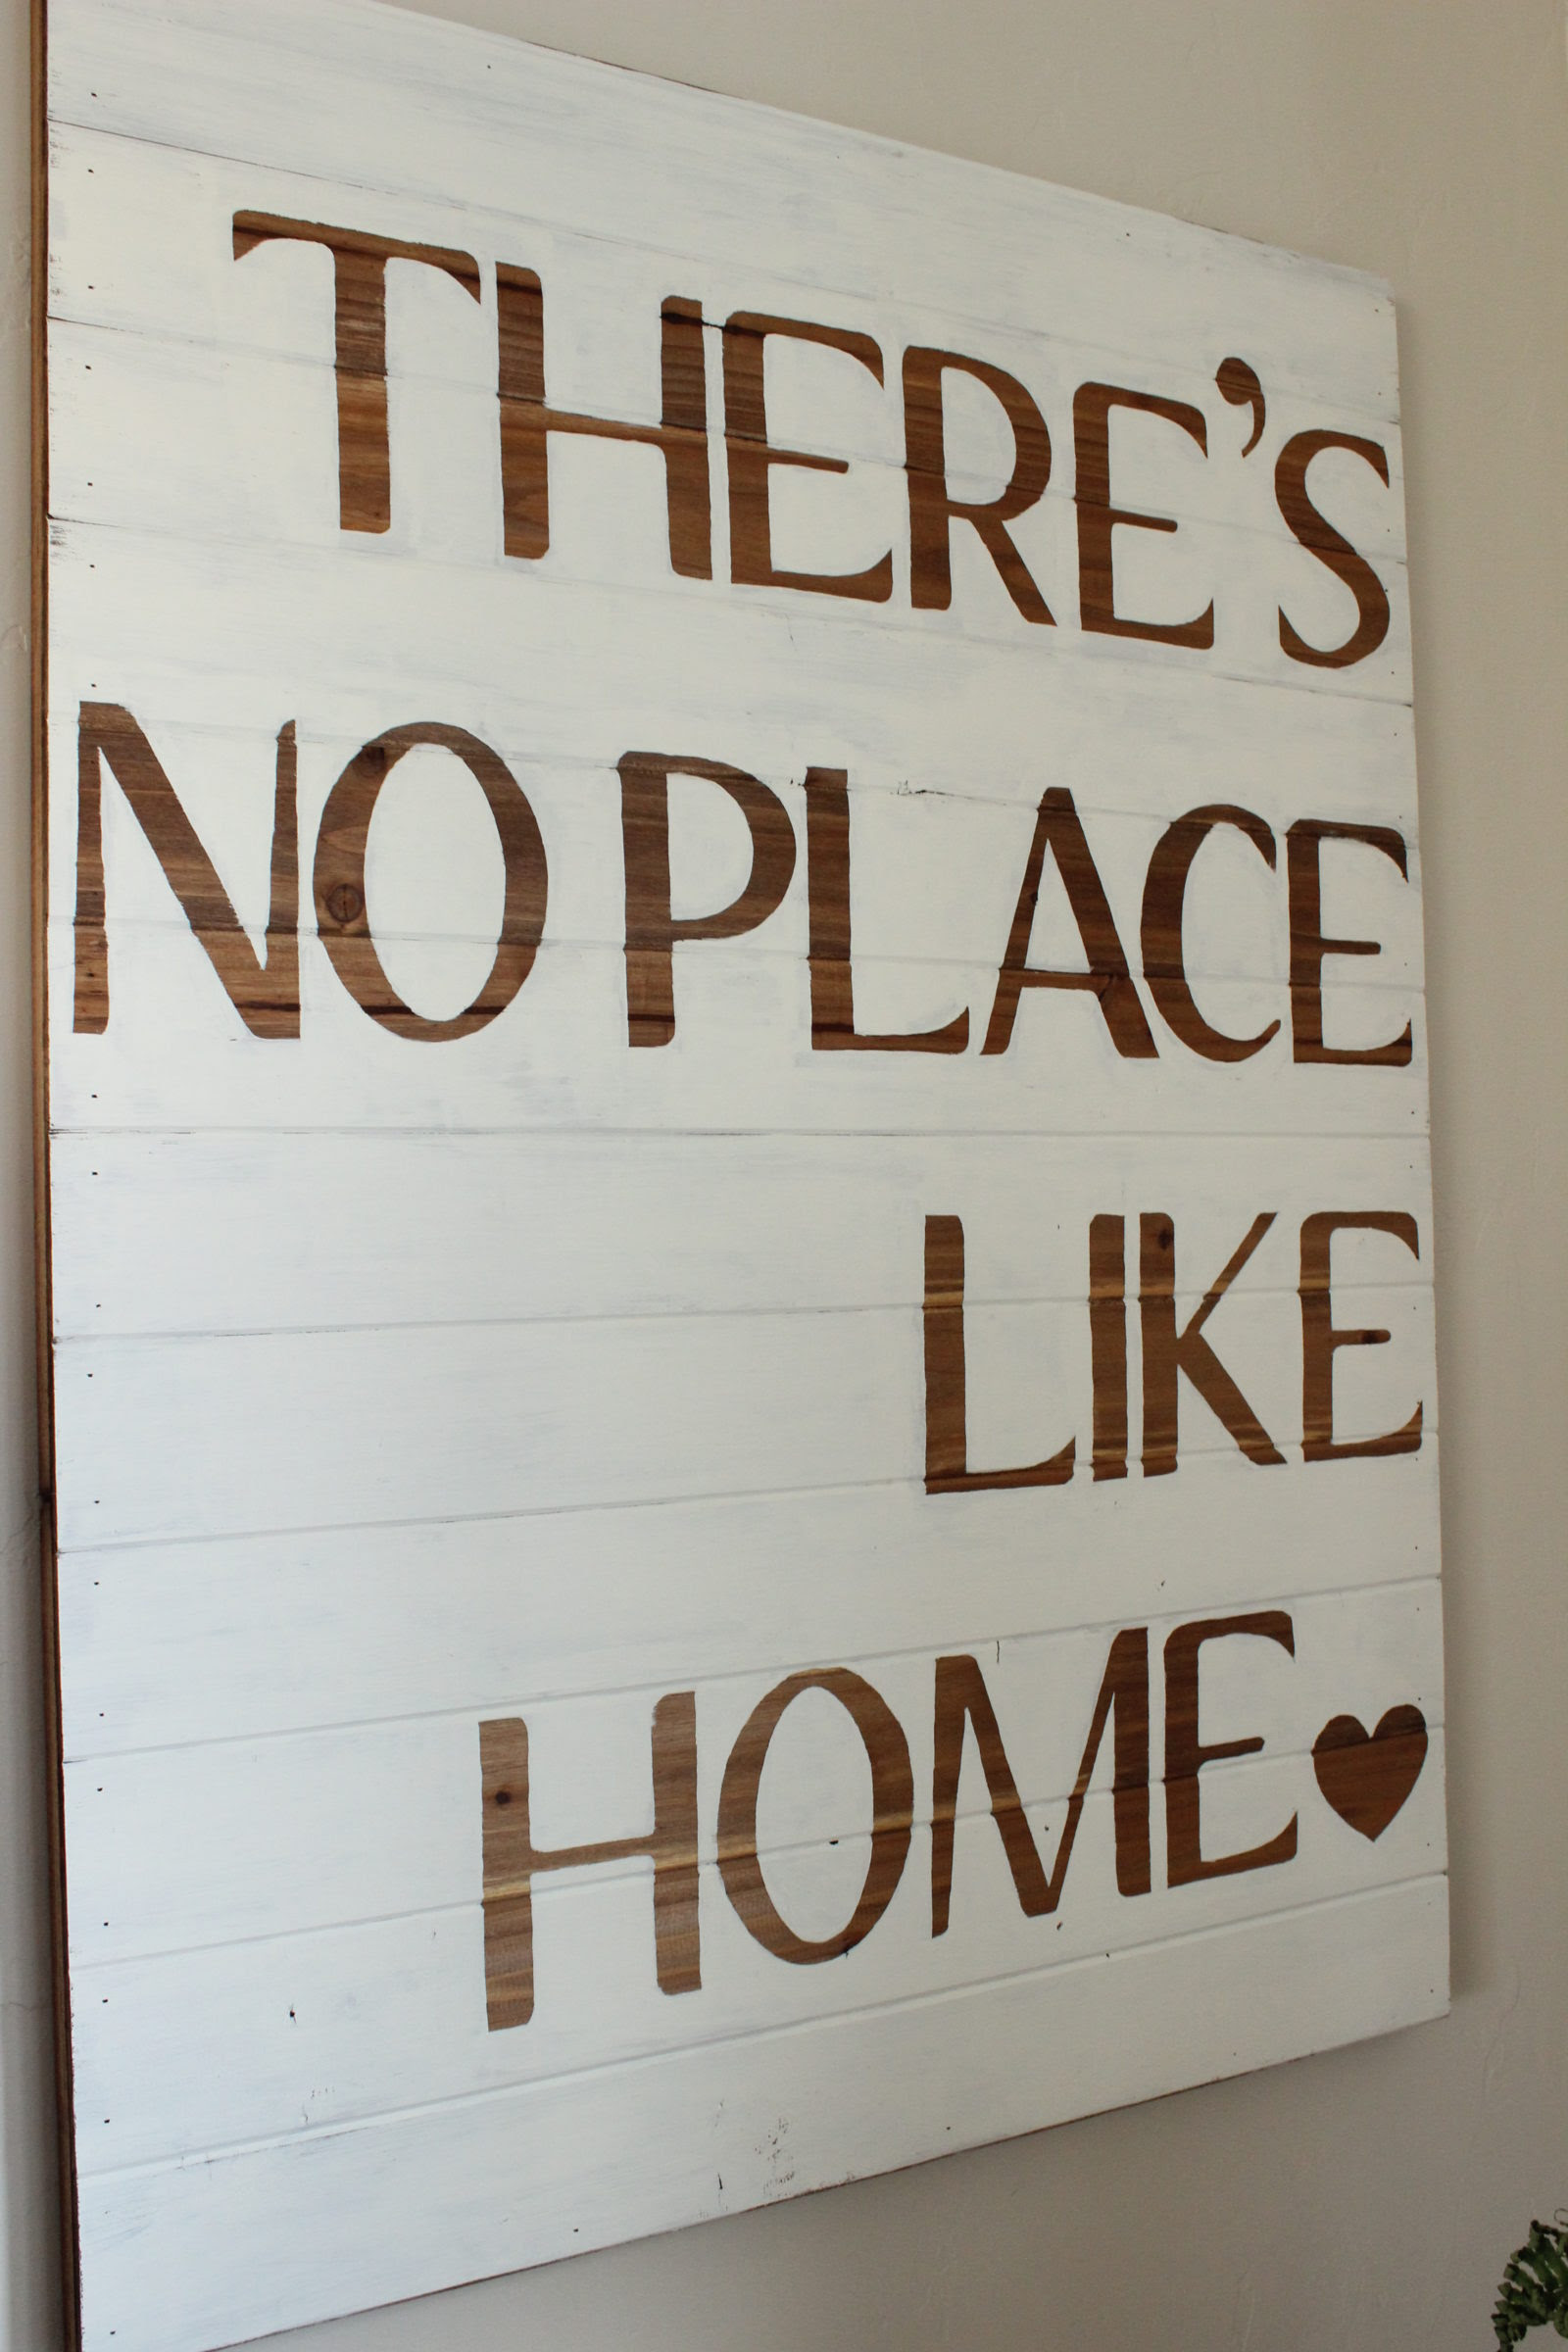 There's No Place Like Home- How To - The Wood Grain Cottage